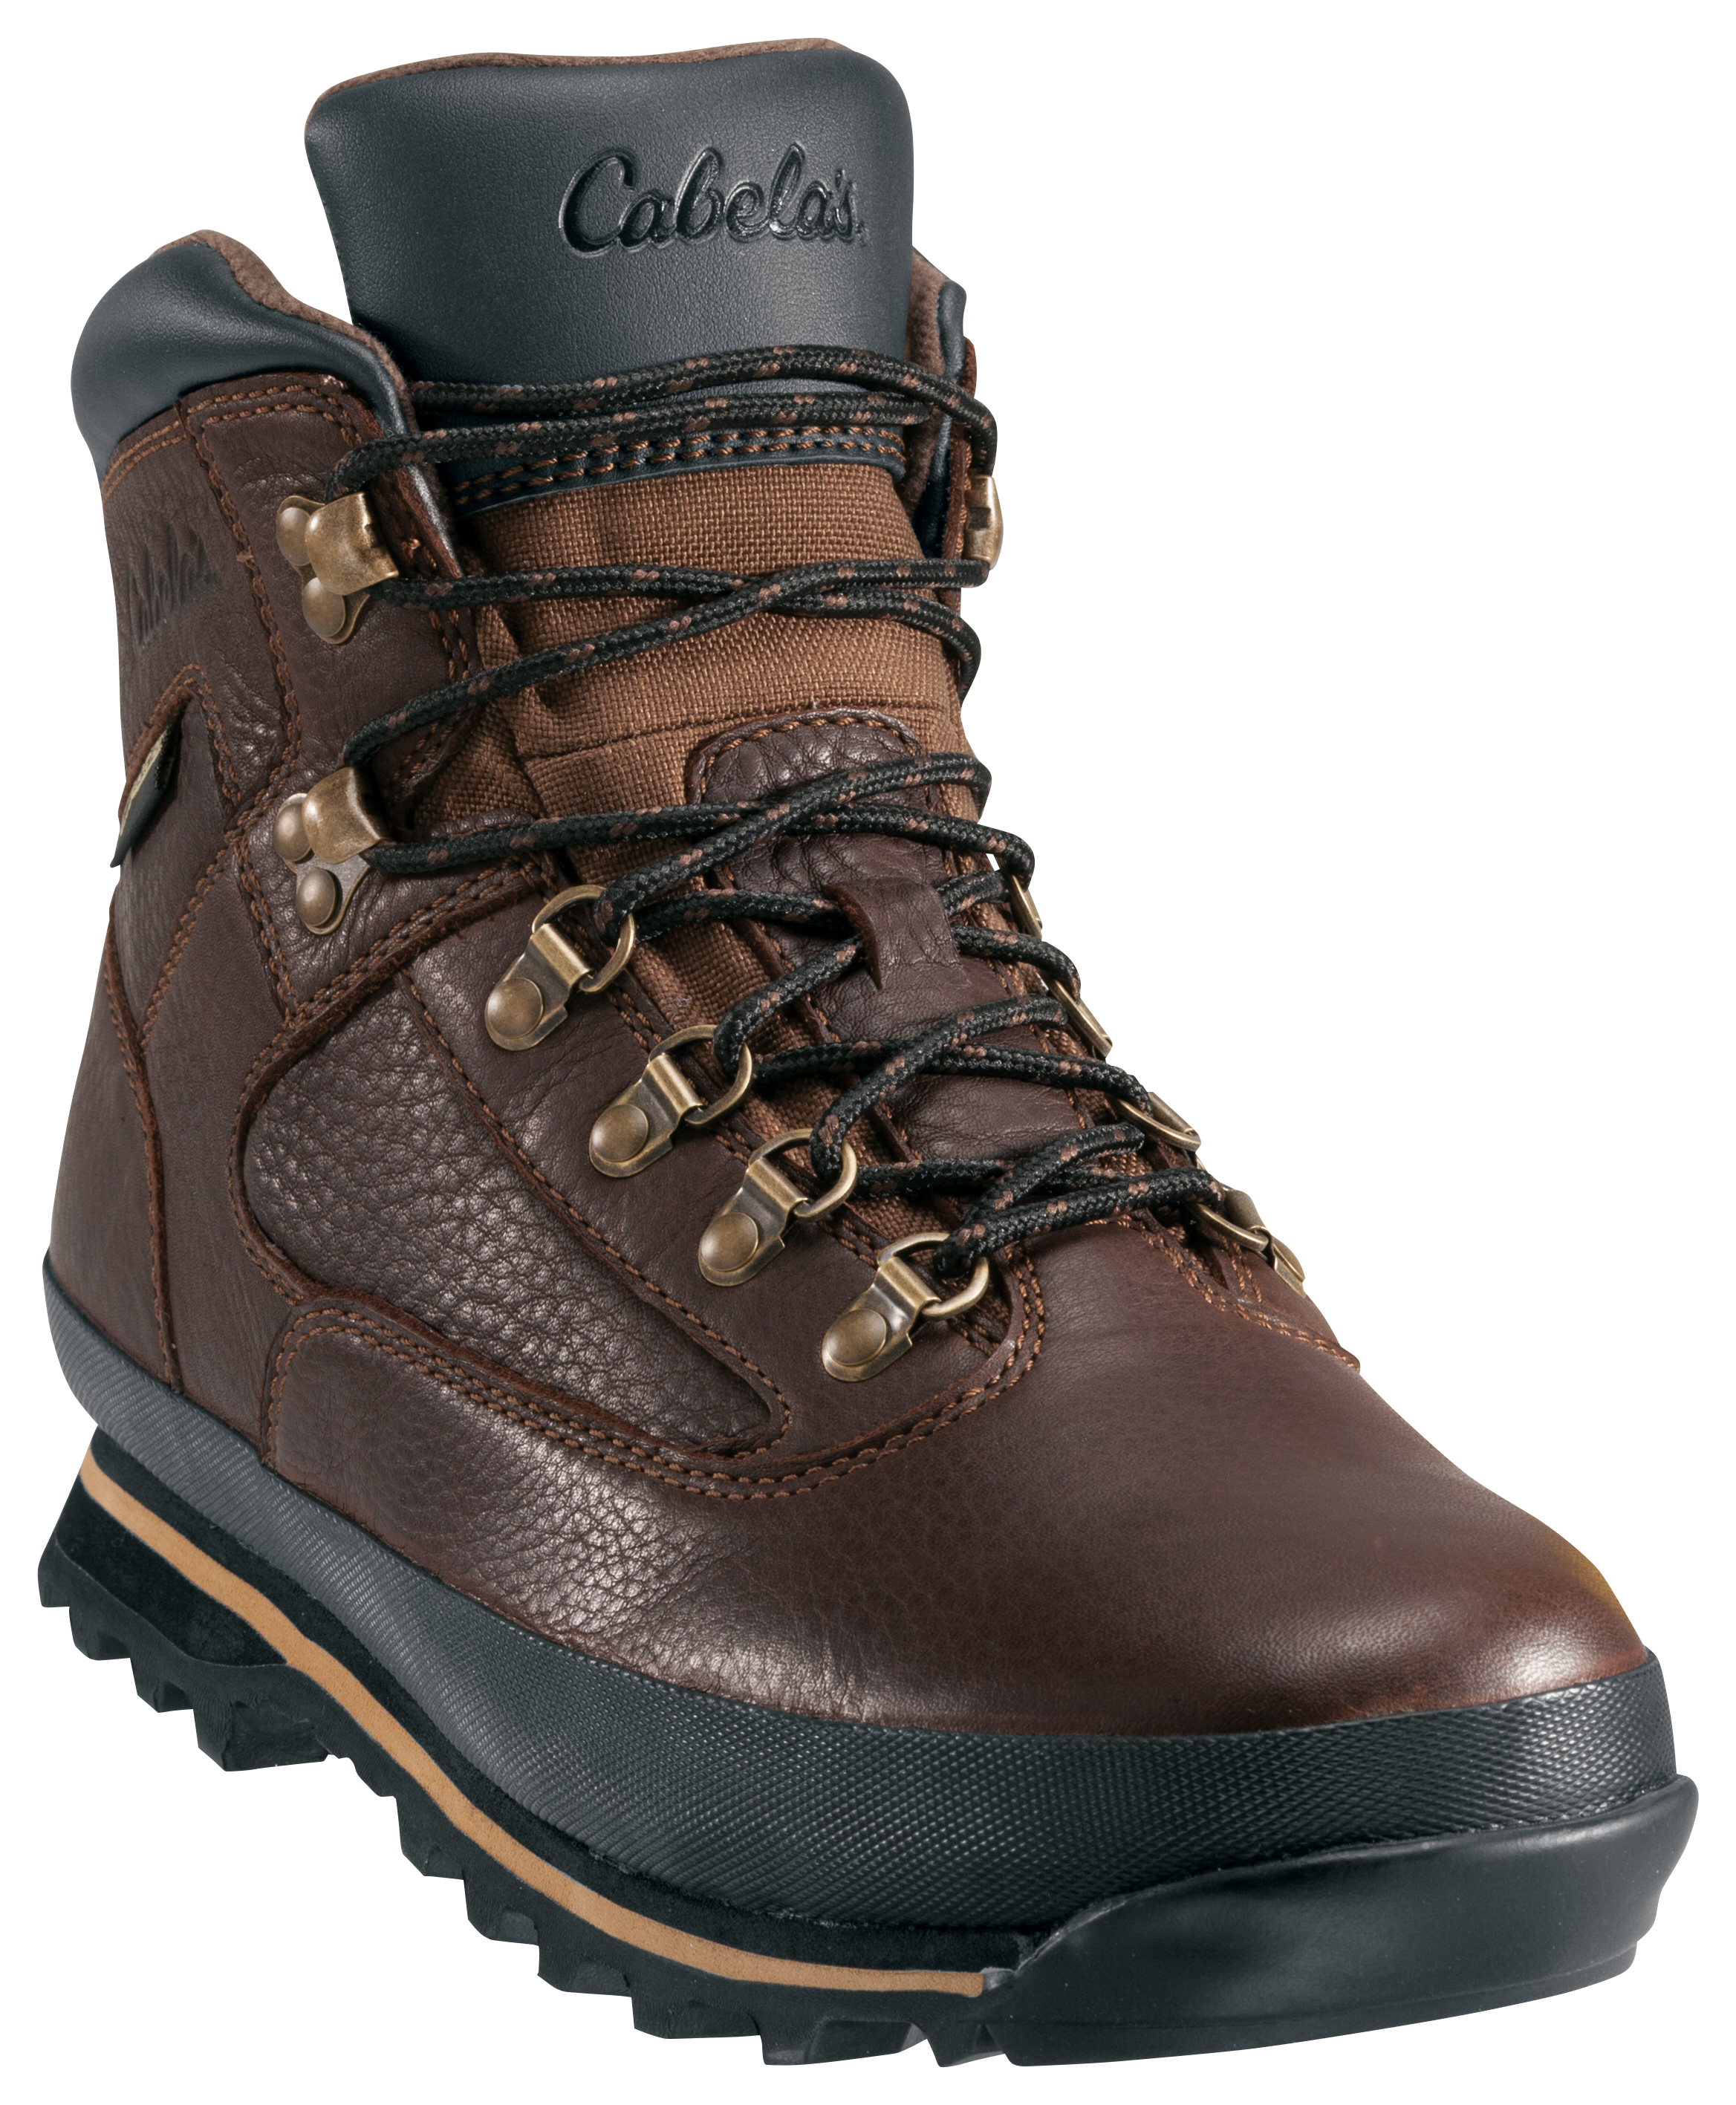 Cabela's Rimrock Mid GORE-TEX Hiking Boots for Men - Brown - 9.5W